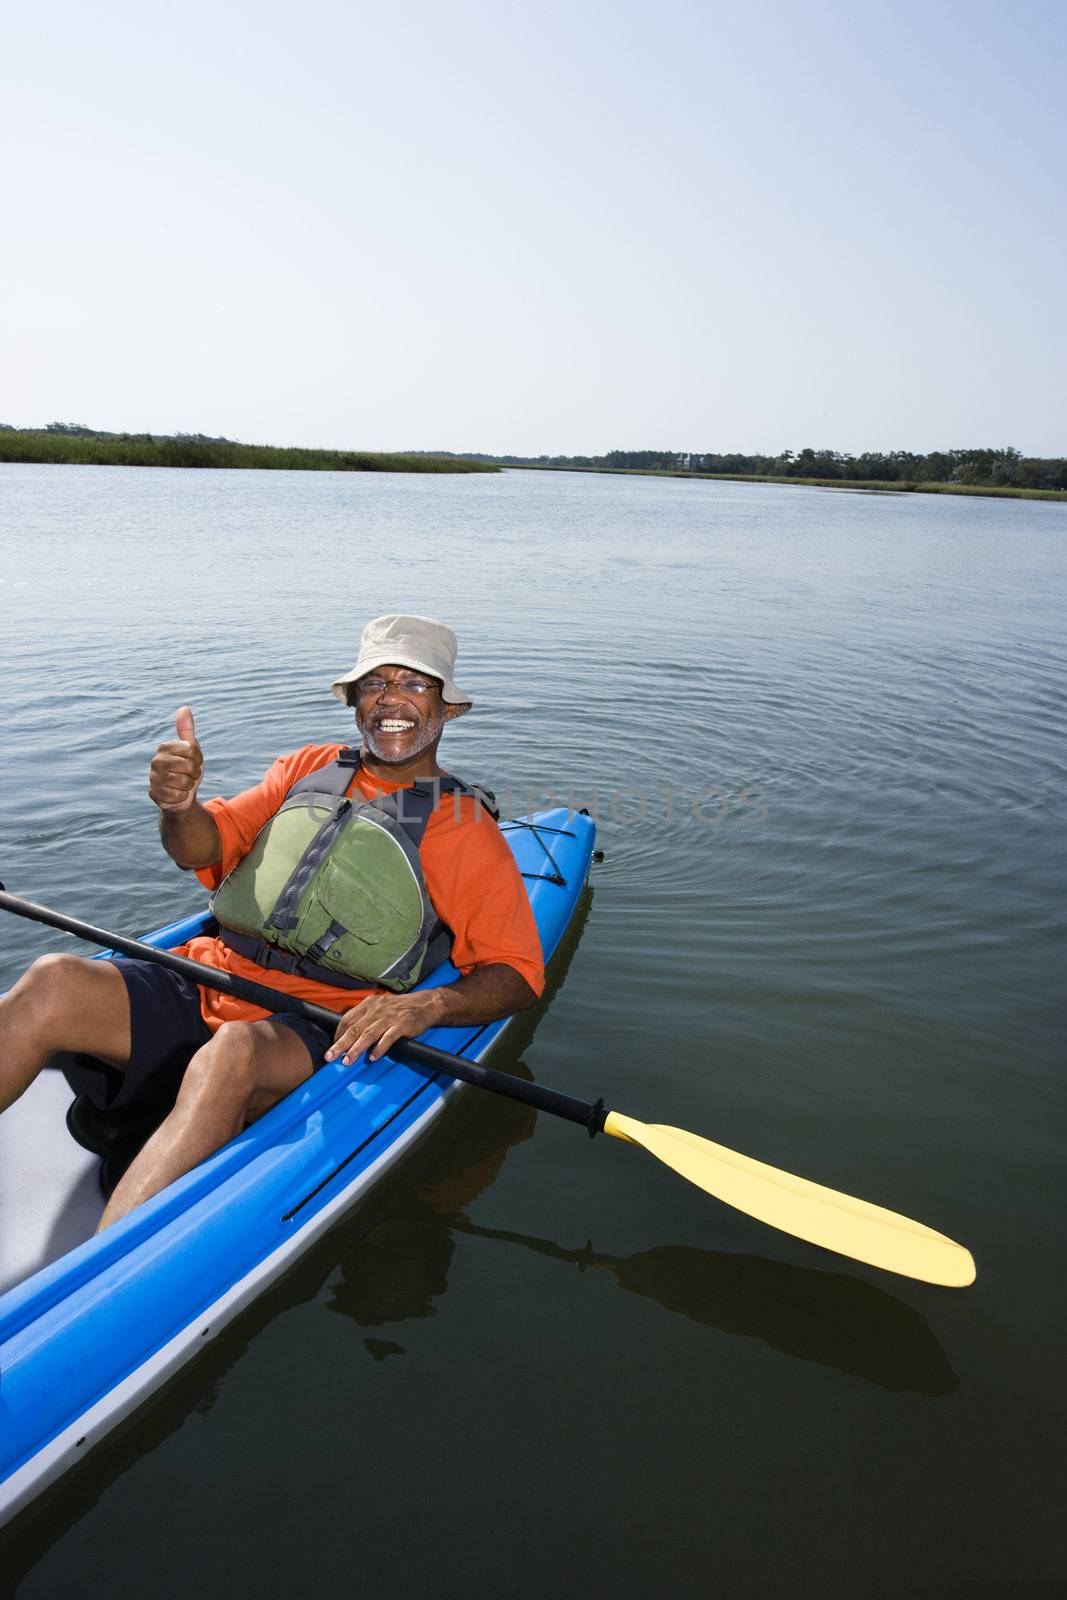 African American middle-aged man smiling and giving thumbs up gesure in kayak.